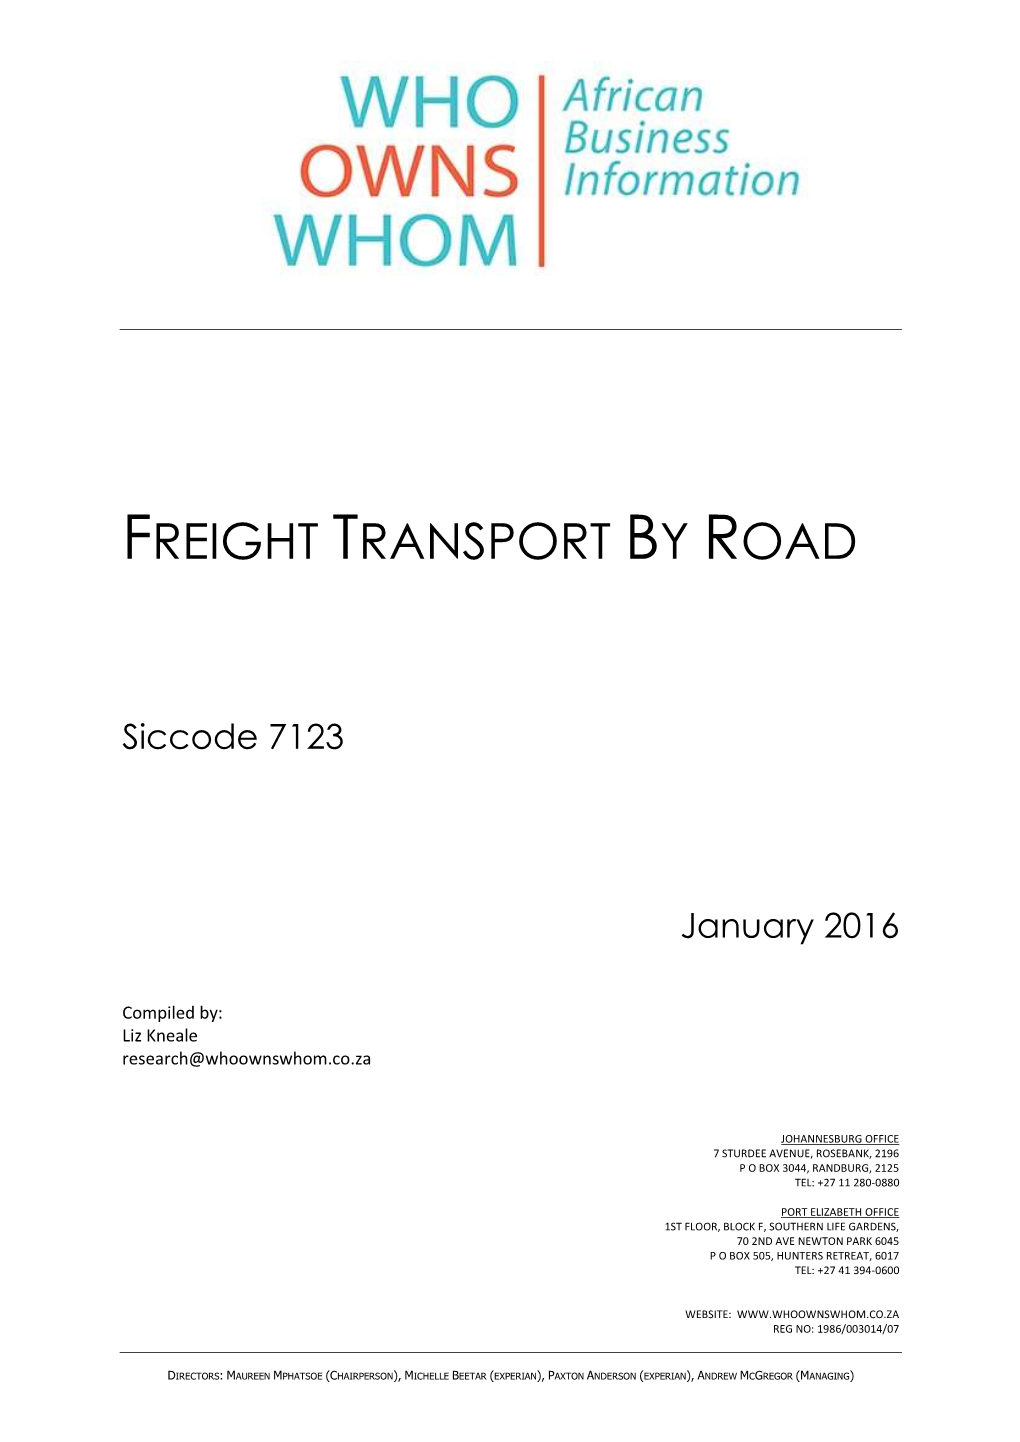 Freight Transport by Road